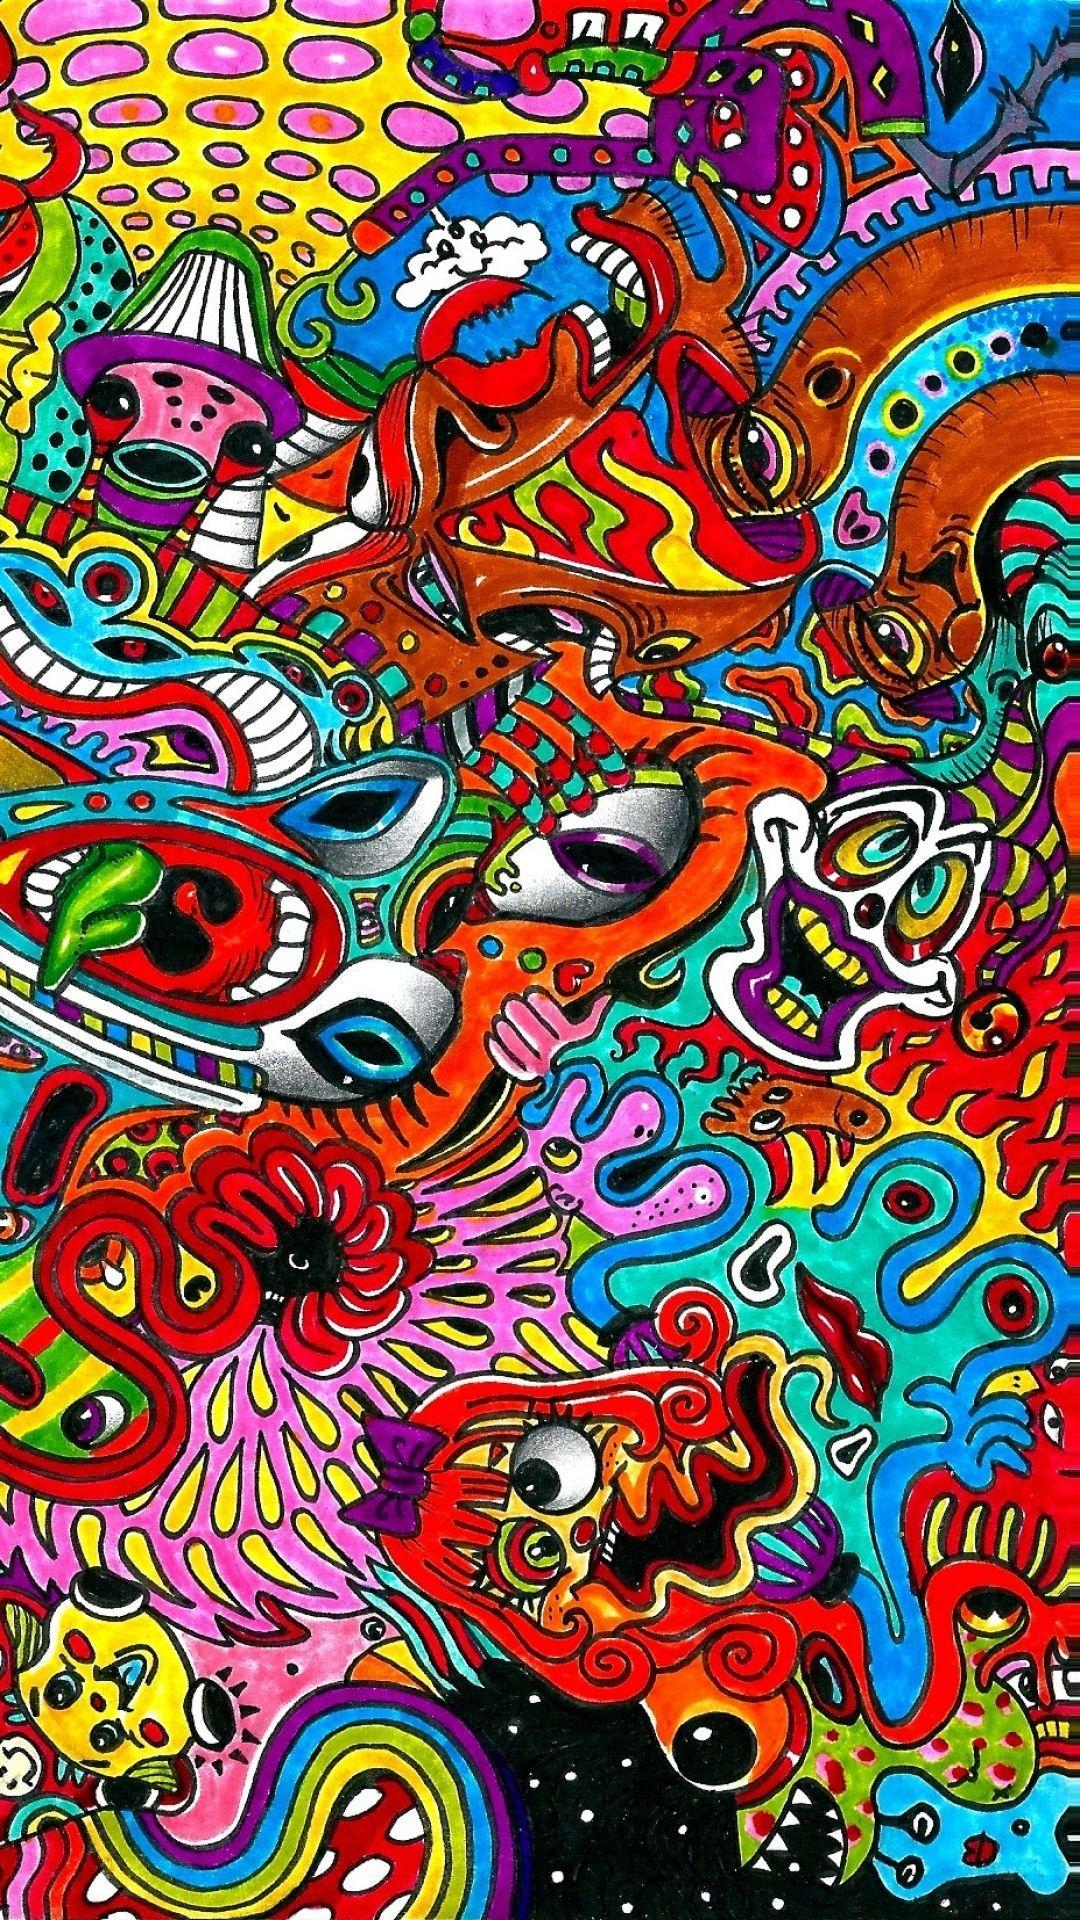 4K Trippy Art Wallpaper Psychedelic:Amazon.com:Appstore for Android